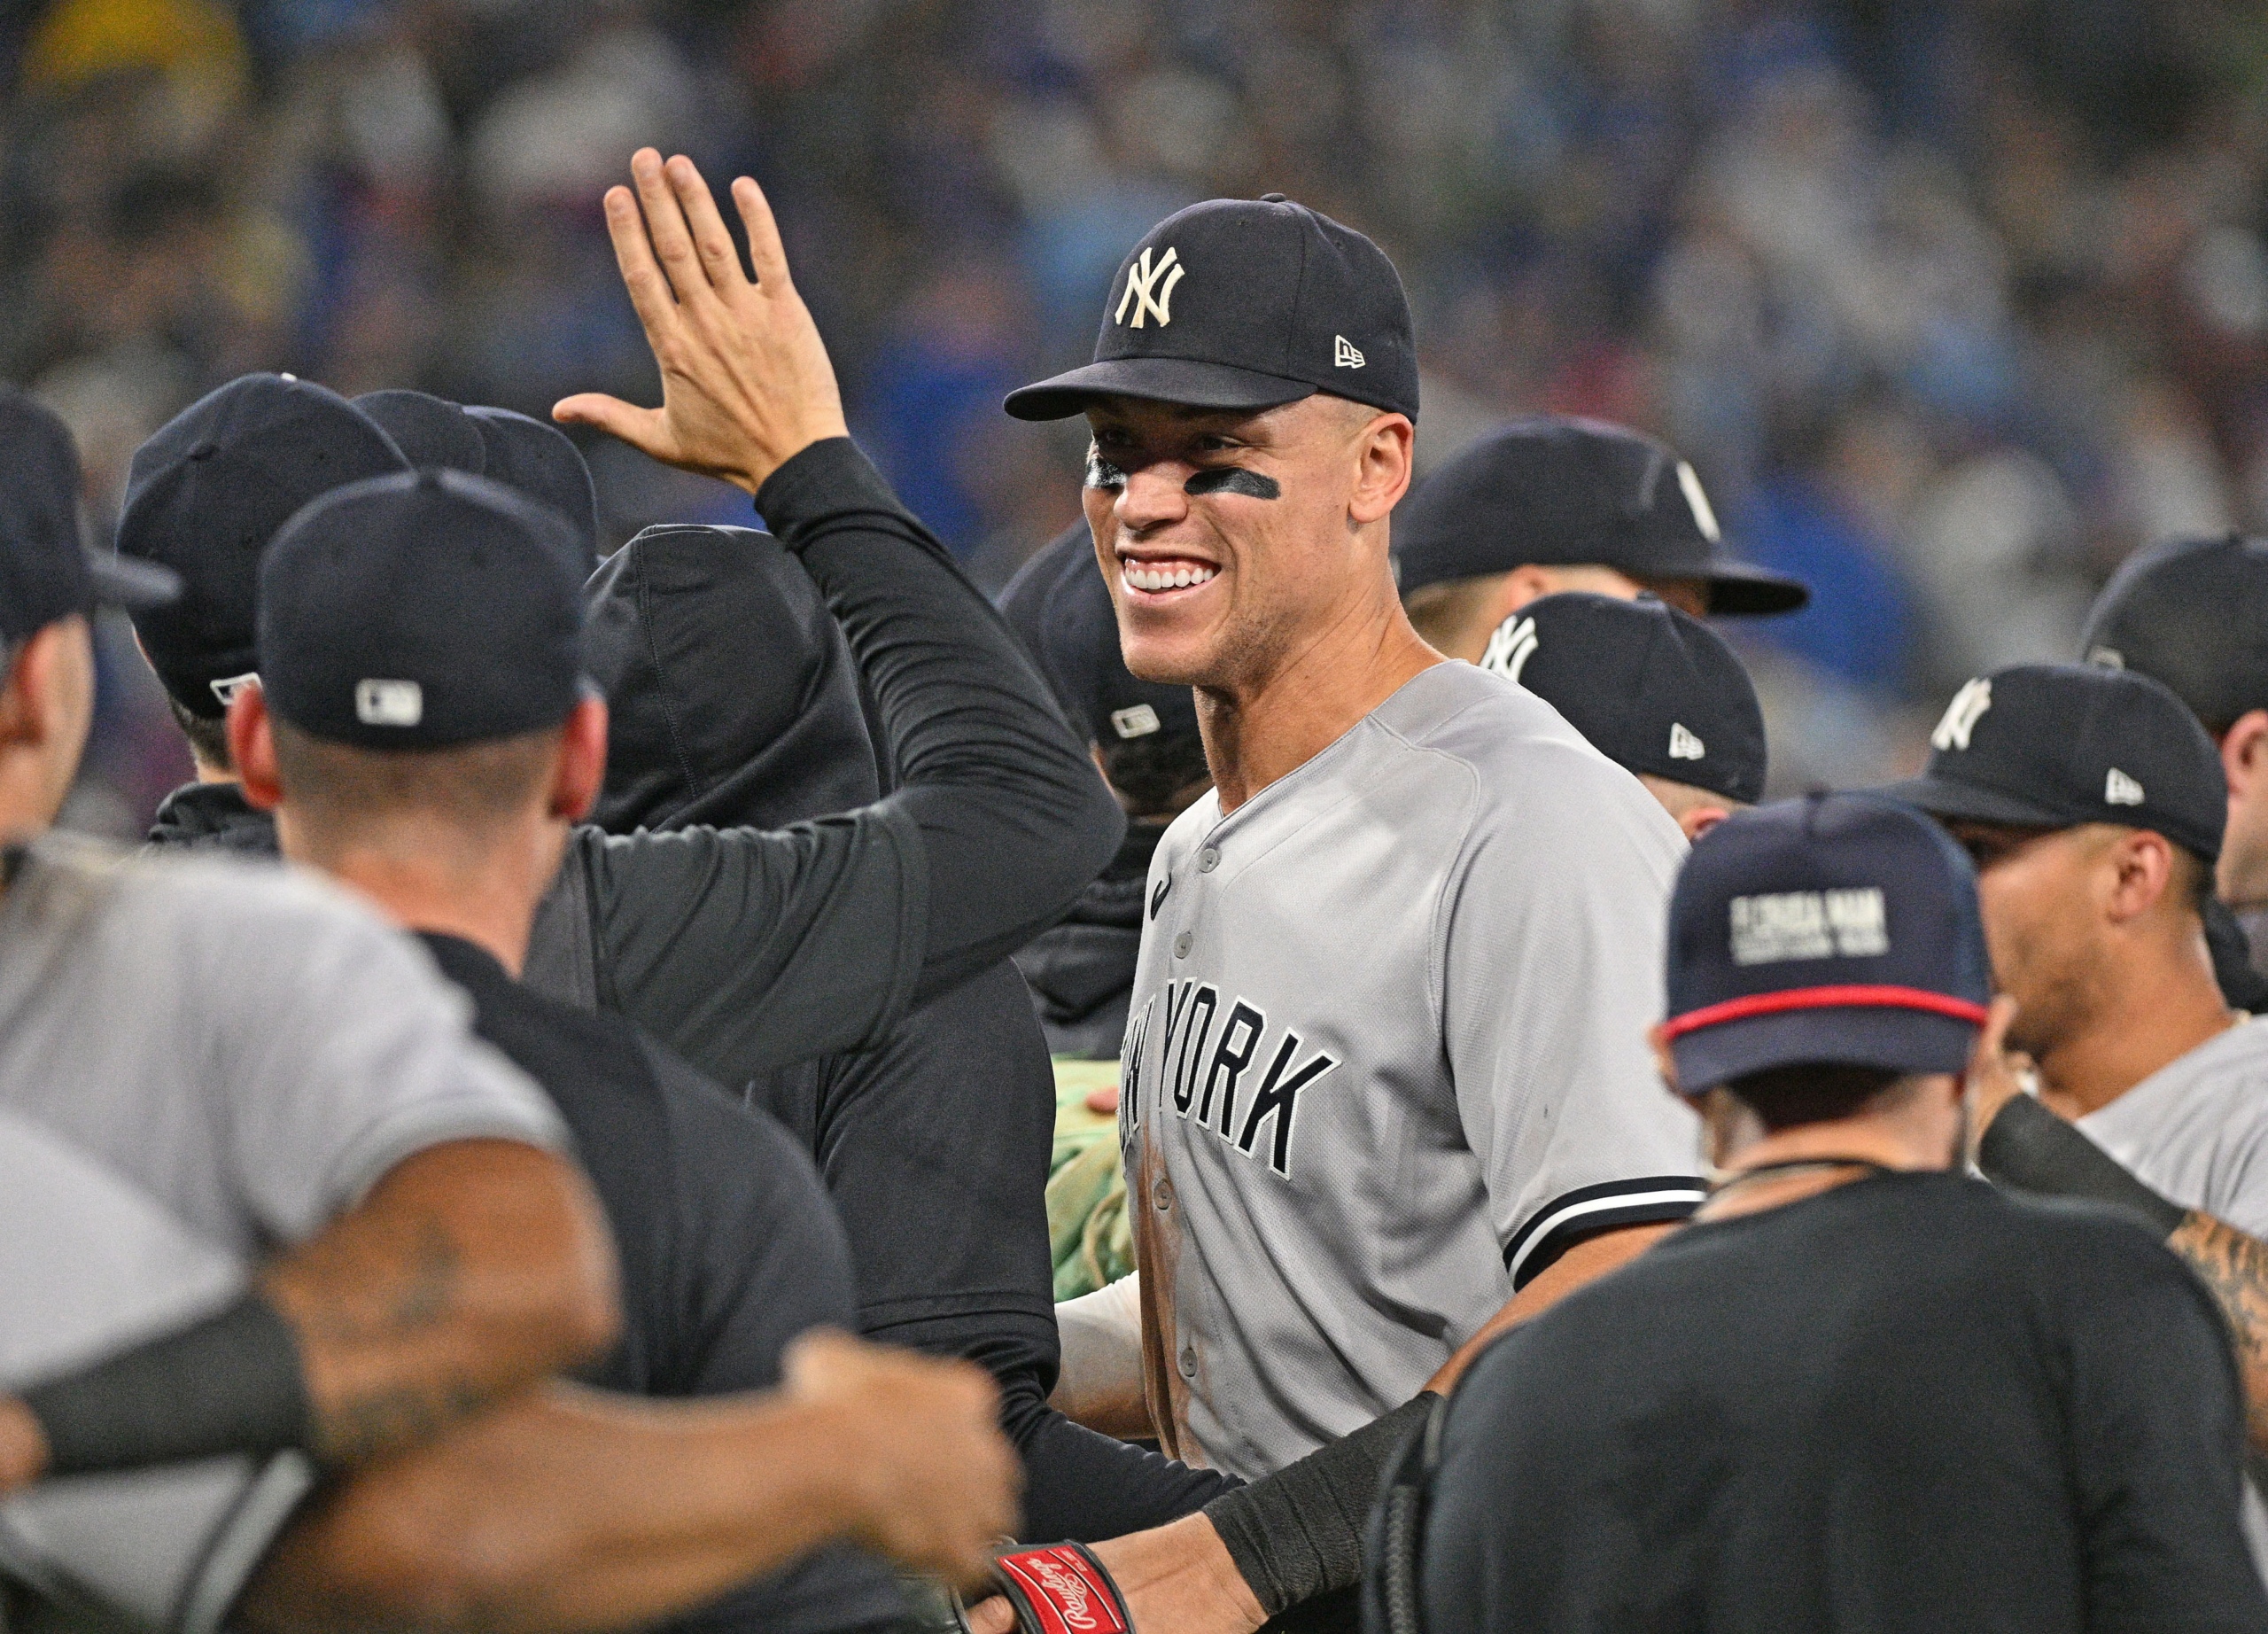 WATCH: Aaron Judge hits 61st home run to tie Roger Maris for American League record